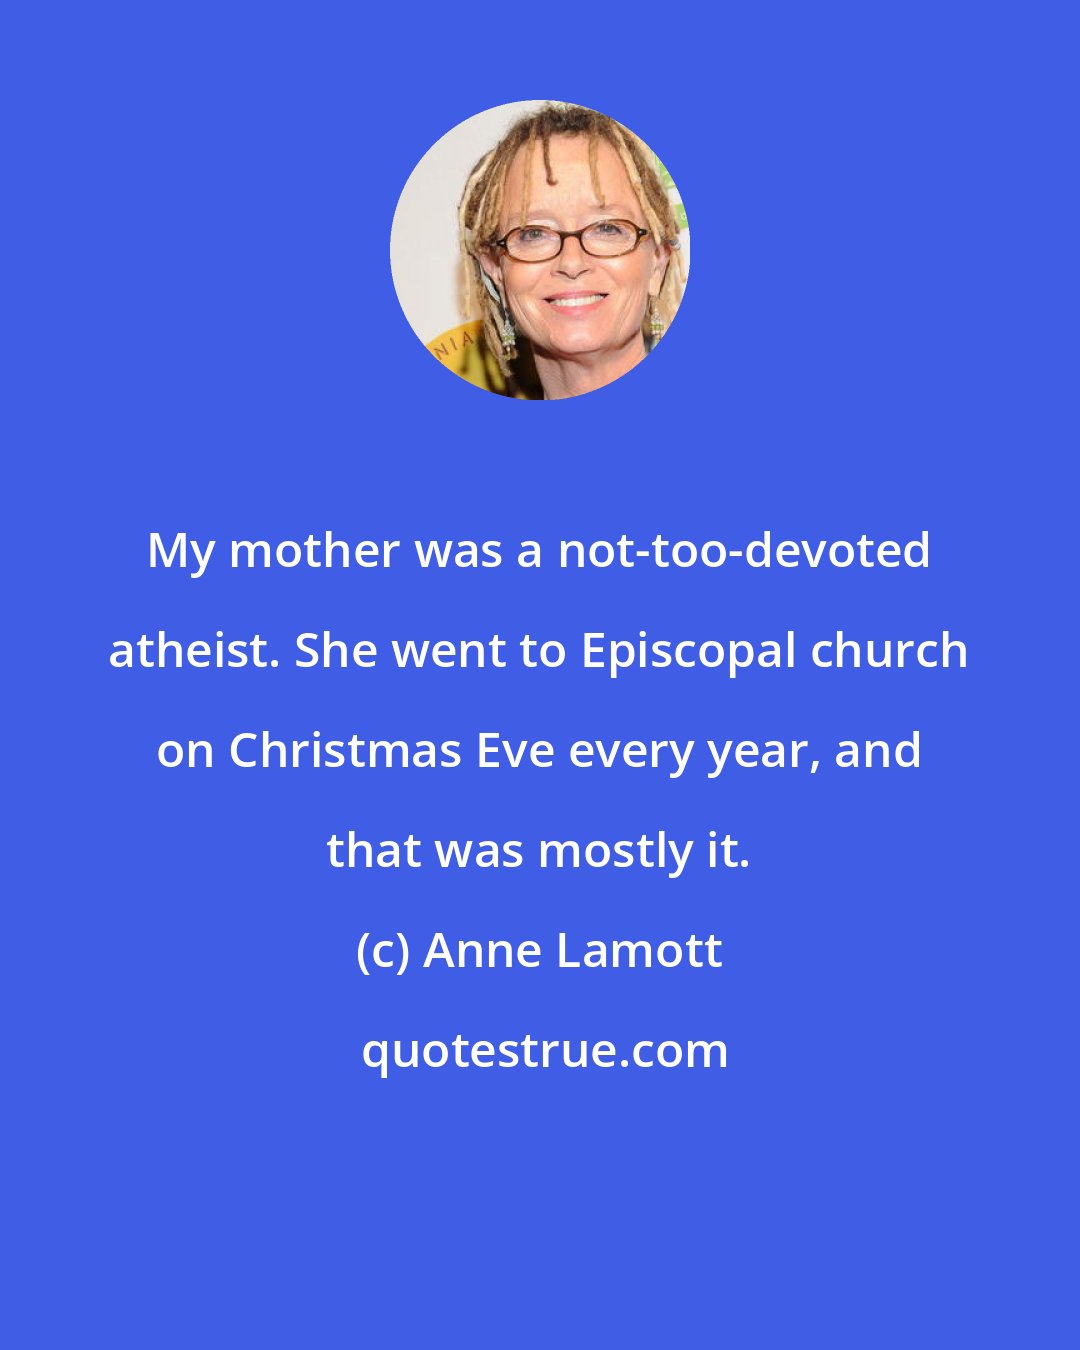 Anne Lamott: My mother was a not-too-devoted atheist. She went to Episcopal church on Christmas Eve every year, and that was mostly it.